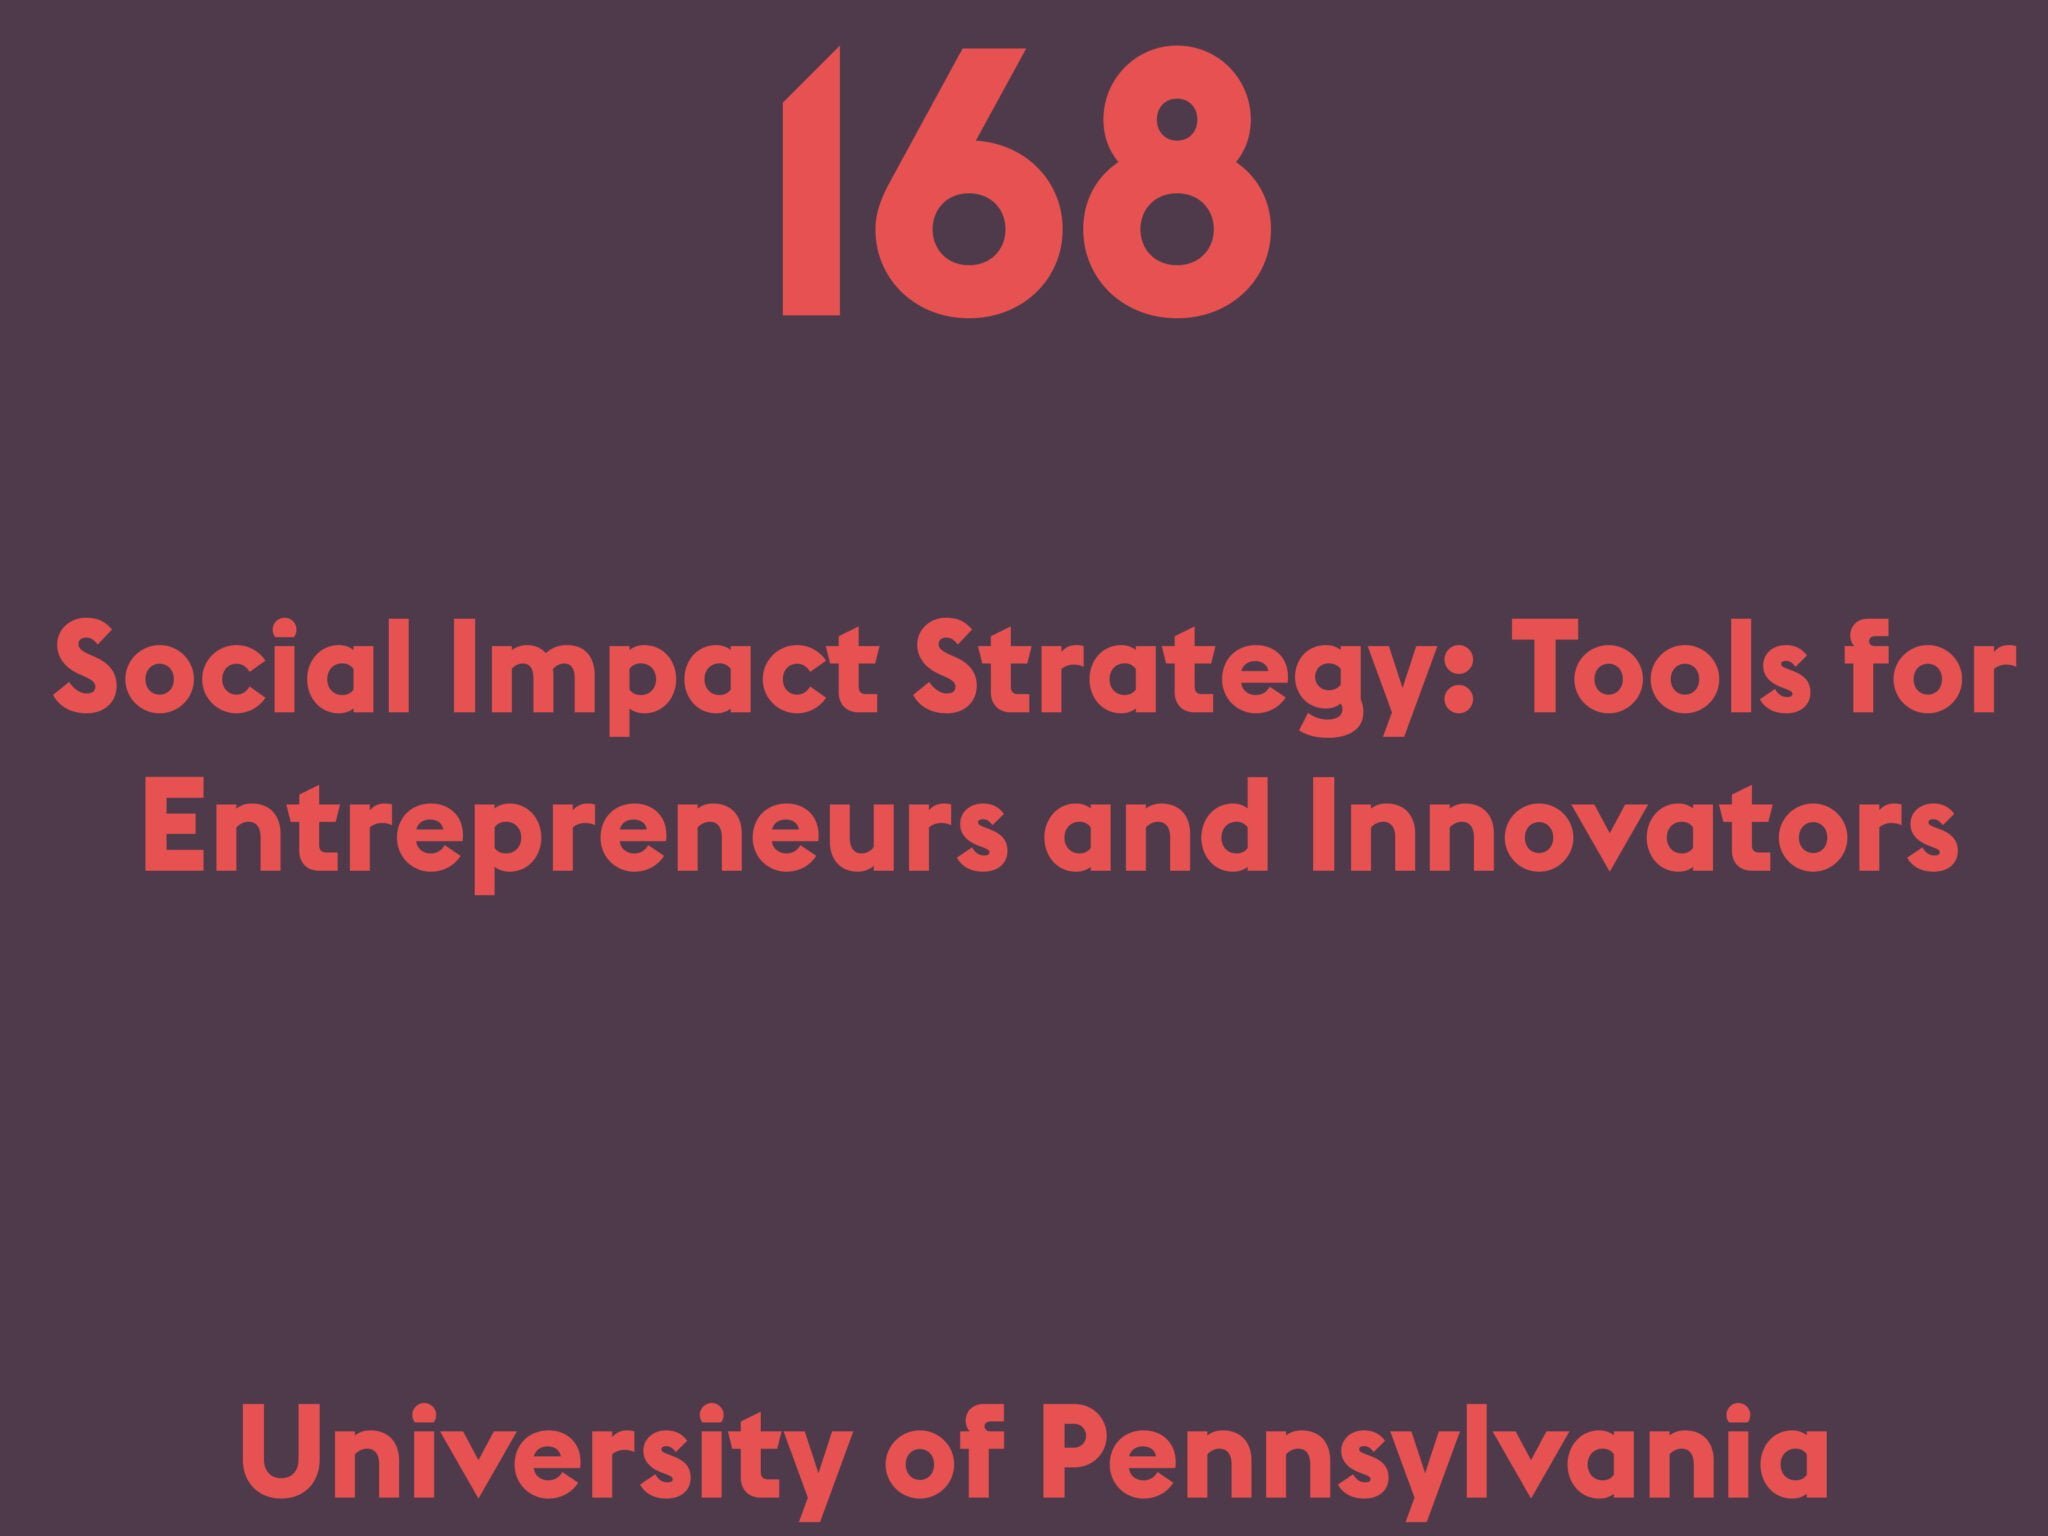 Social Impact Strategy: Tools for Entrepreneurs and Innovators